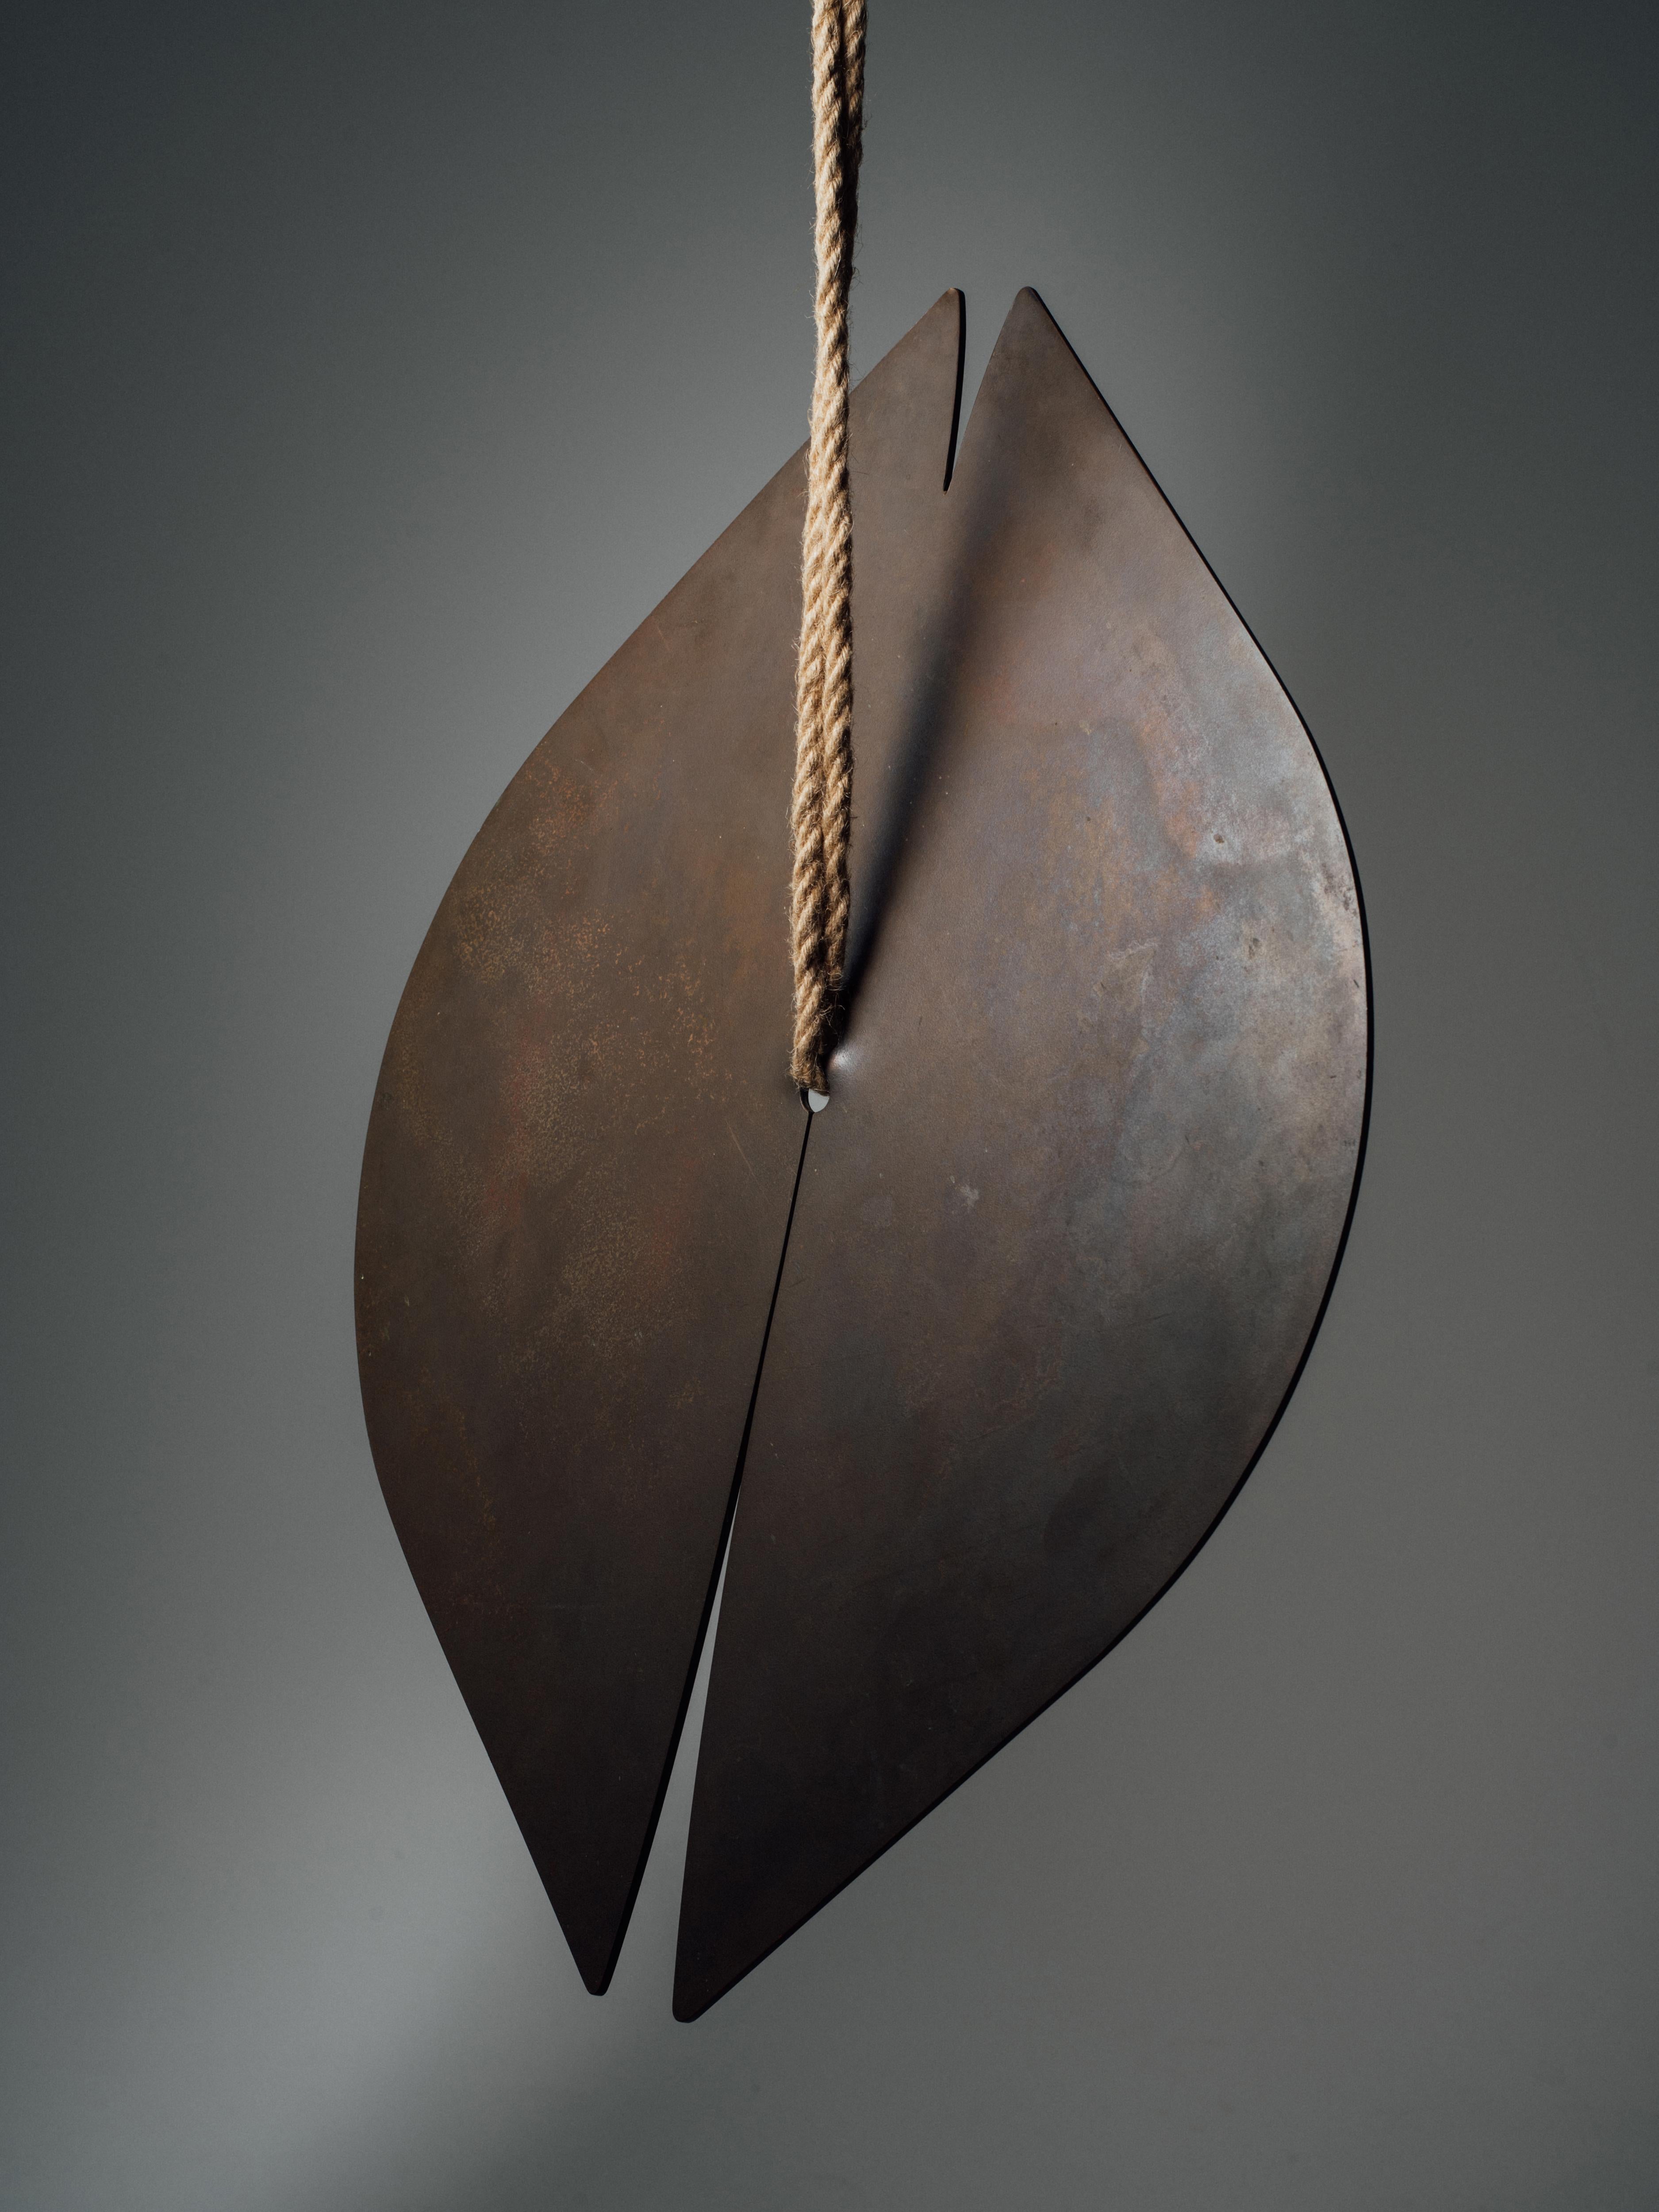 Mid-Century Modern Harry Bertoia Untitled Suspended Gong Sculpture with COA, circa 1975